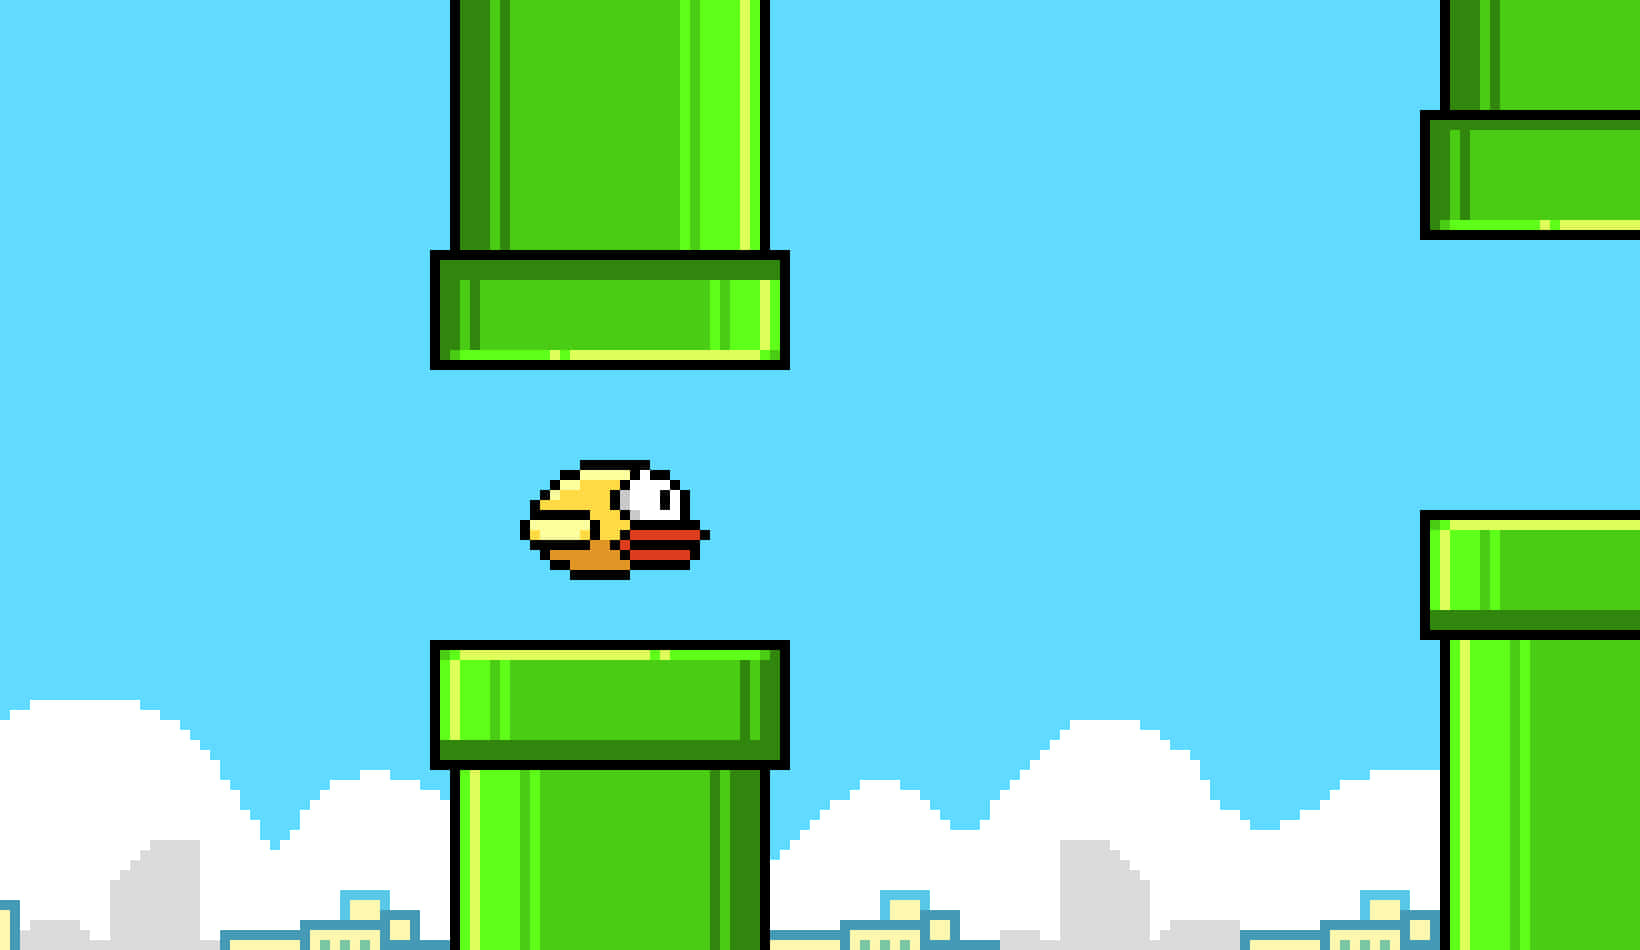 100+] Flappy Bird Background s for FREE 